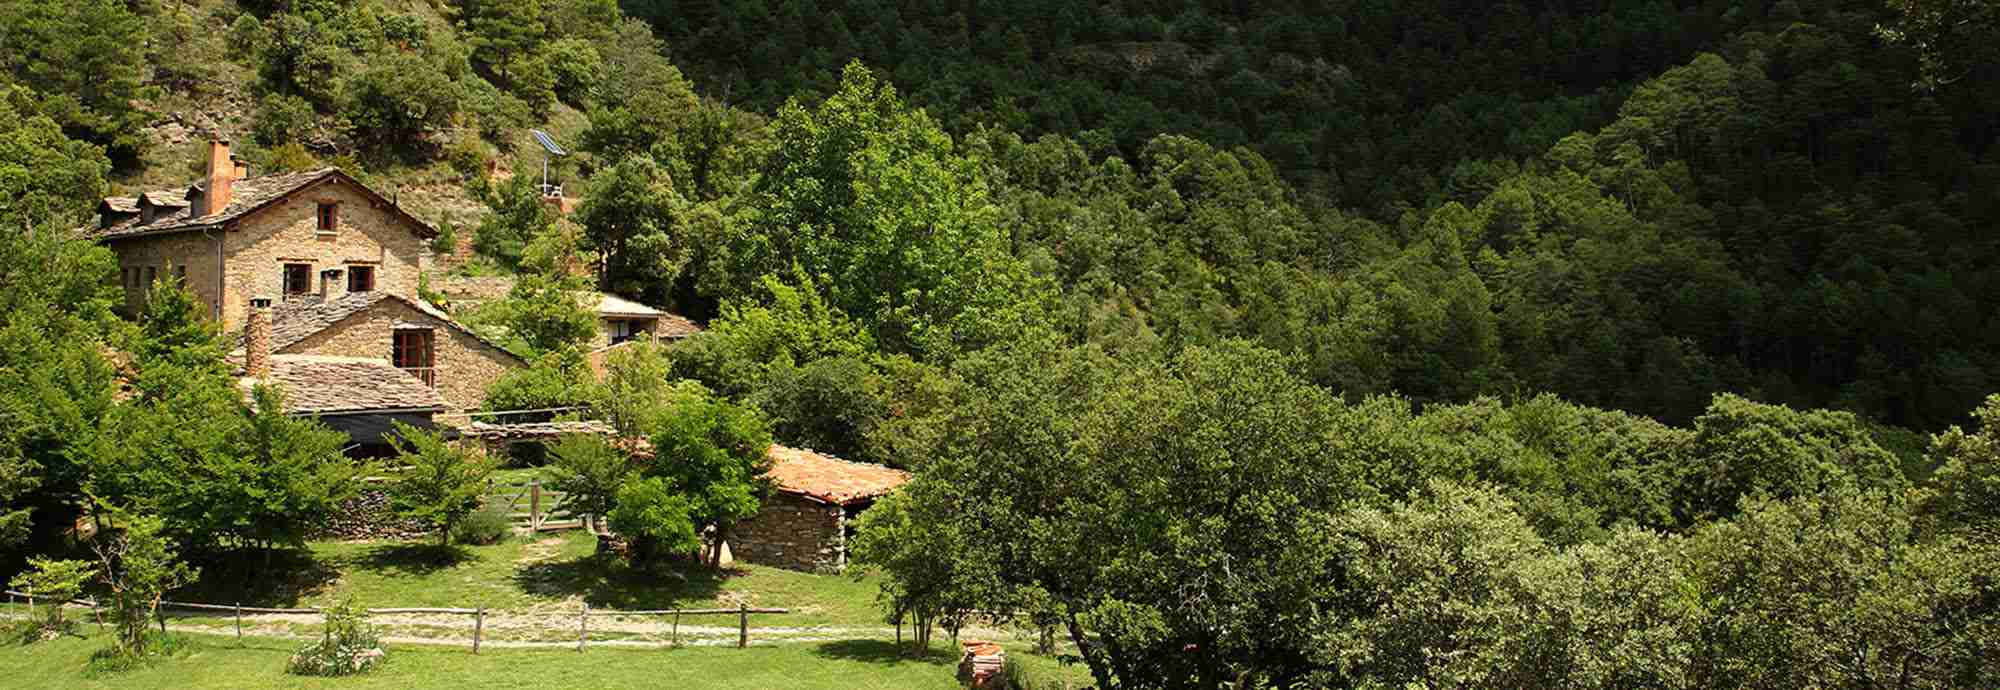 Eco-cottage with pool in the natural retreat of the early Pyrenees